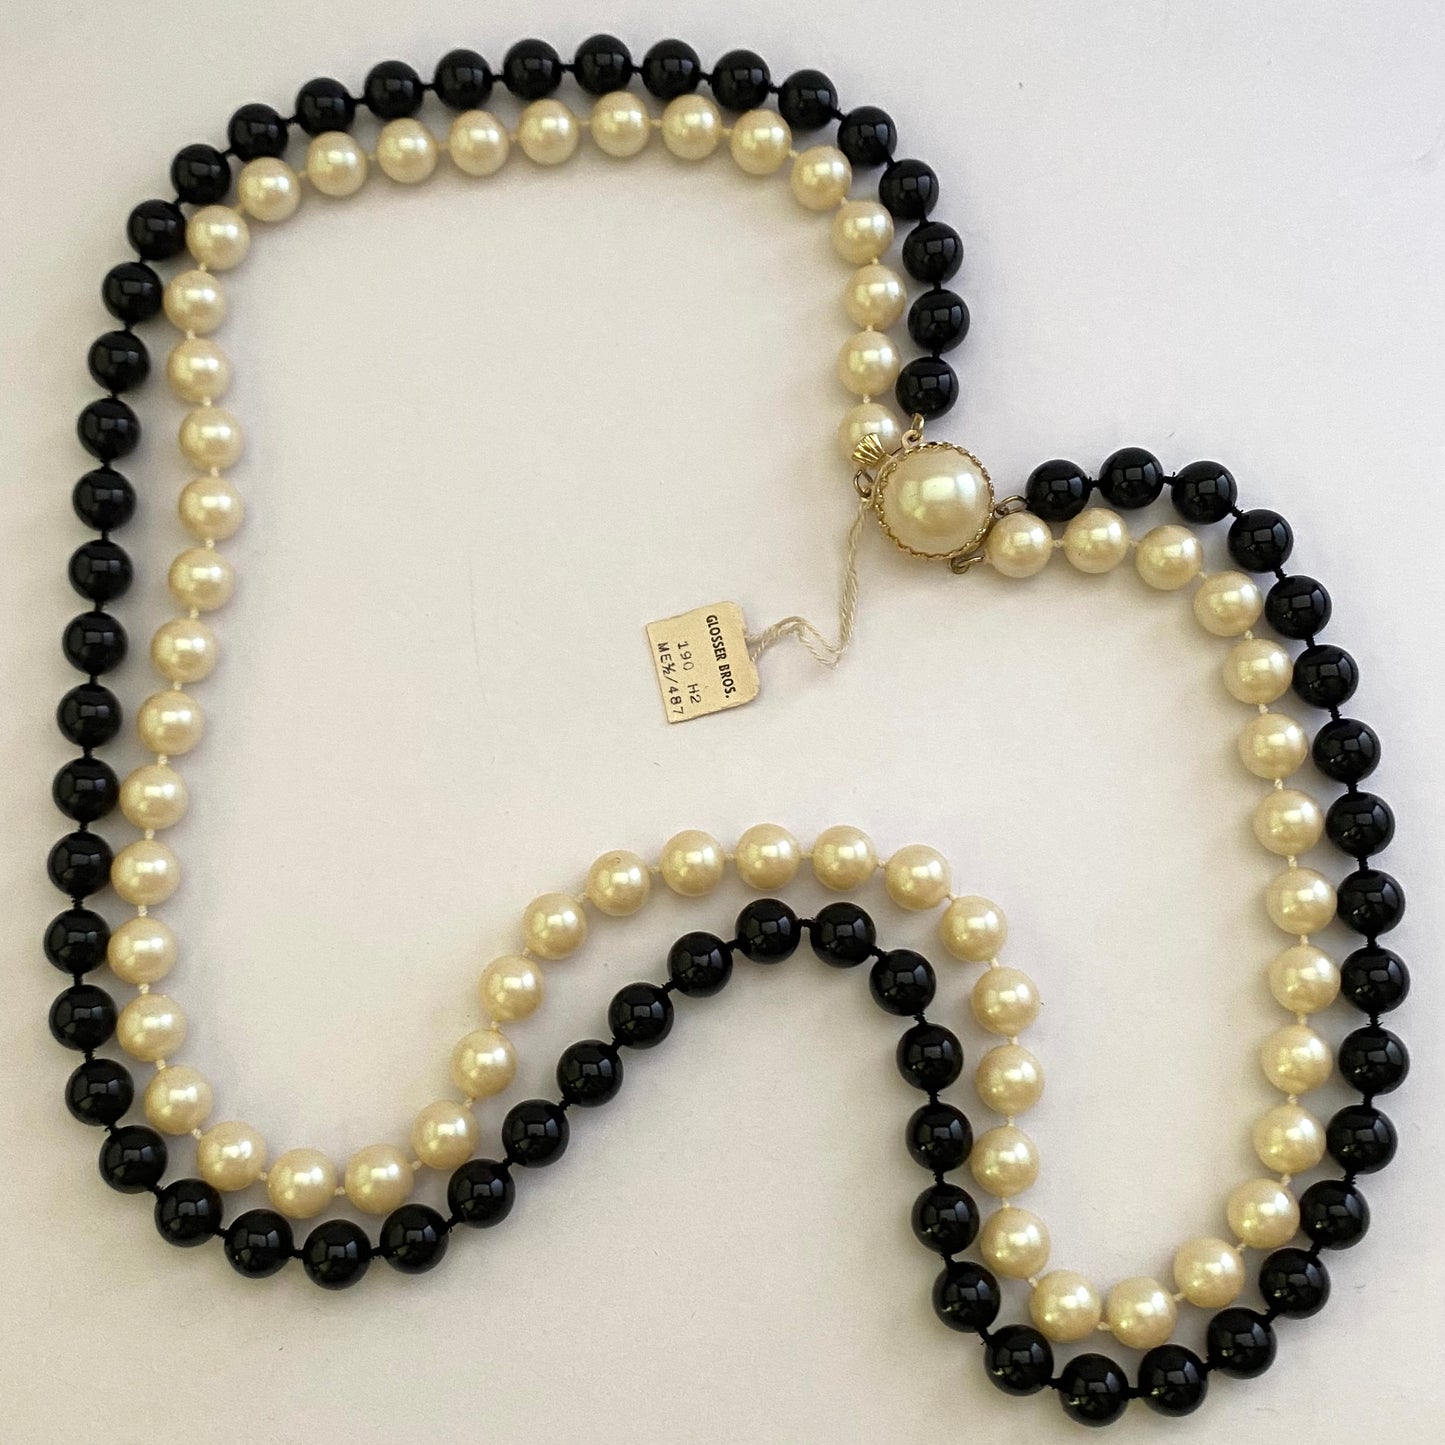 1960s NEW! Hong Kong Double Strand Bead Necklace